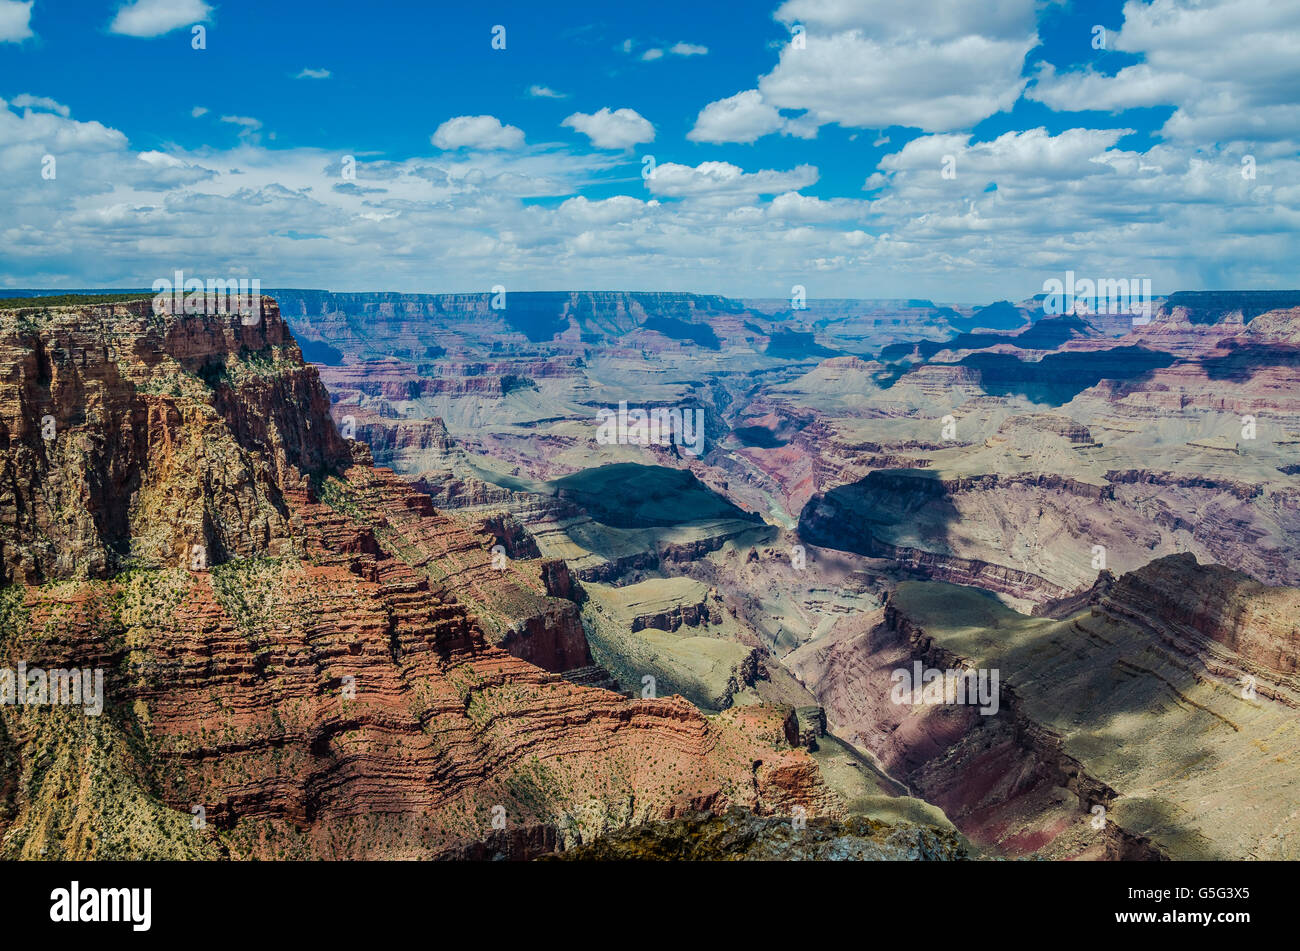 Overview of the Grand Canyon National Park, Arizona Stock Photo